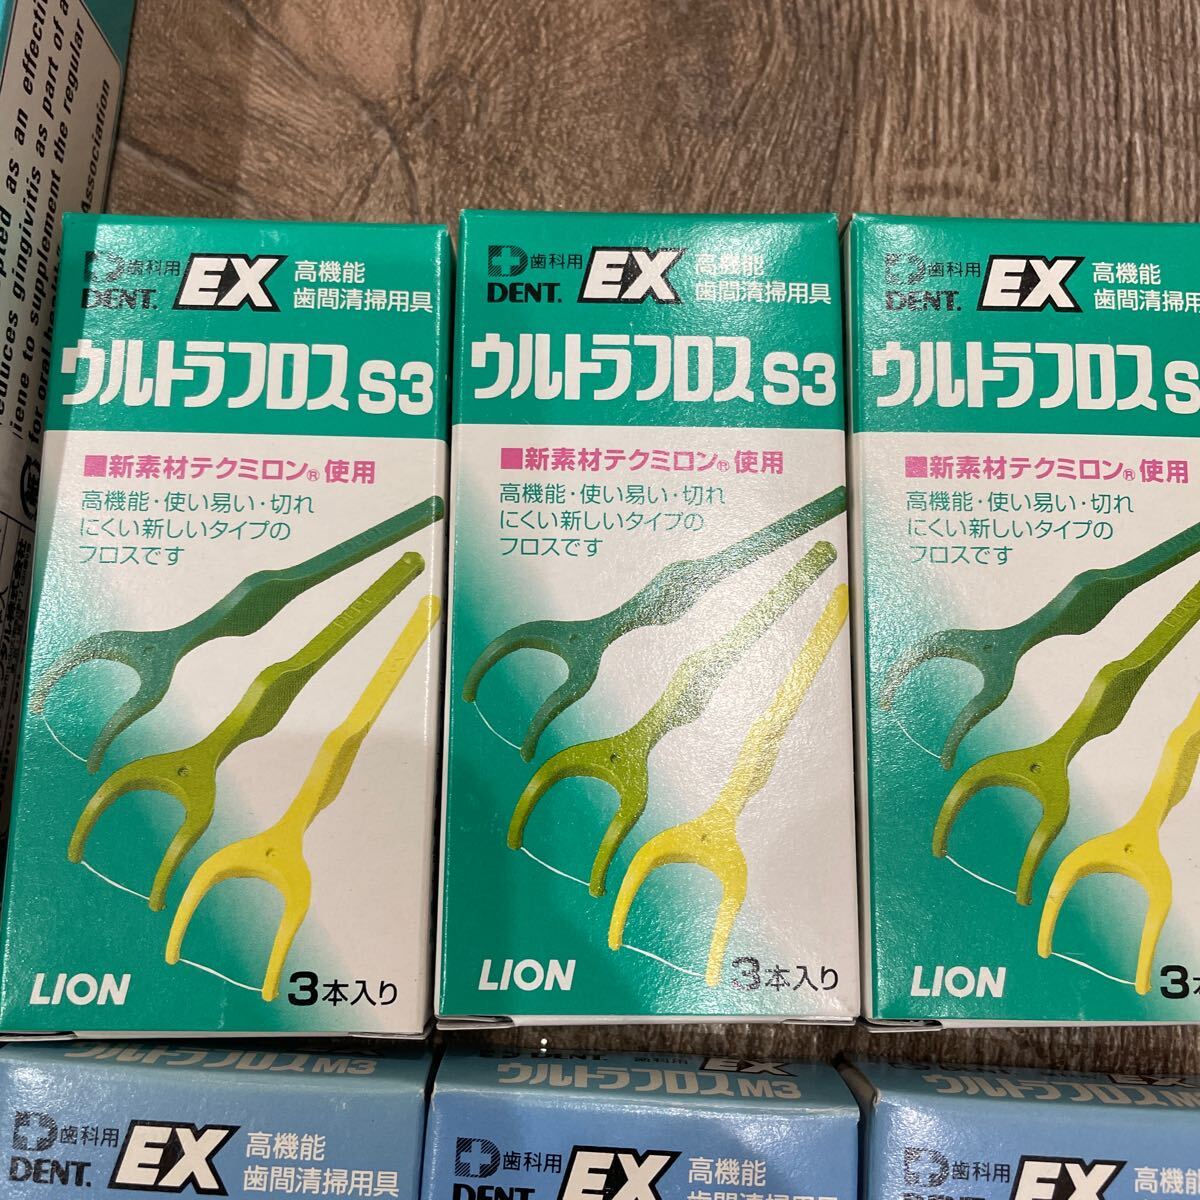  new goods unused storage goods tooth . for DENT.EX tooth interval brush SS S M Ultra f Roth toothbrush super f Roth 24 box set together profit LION large amount 